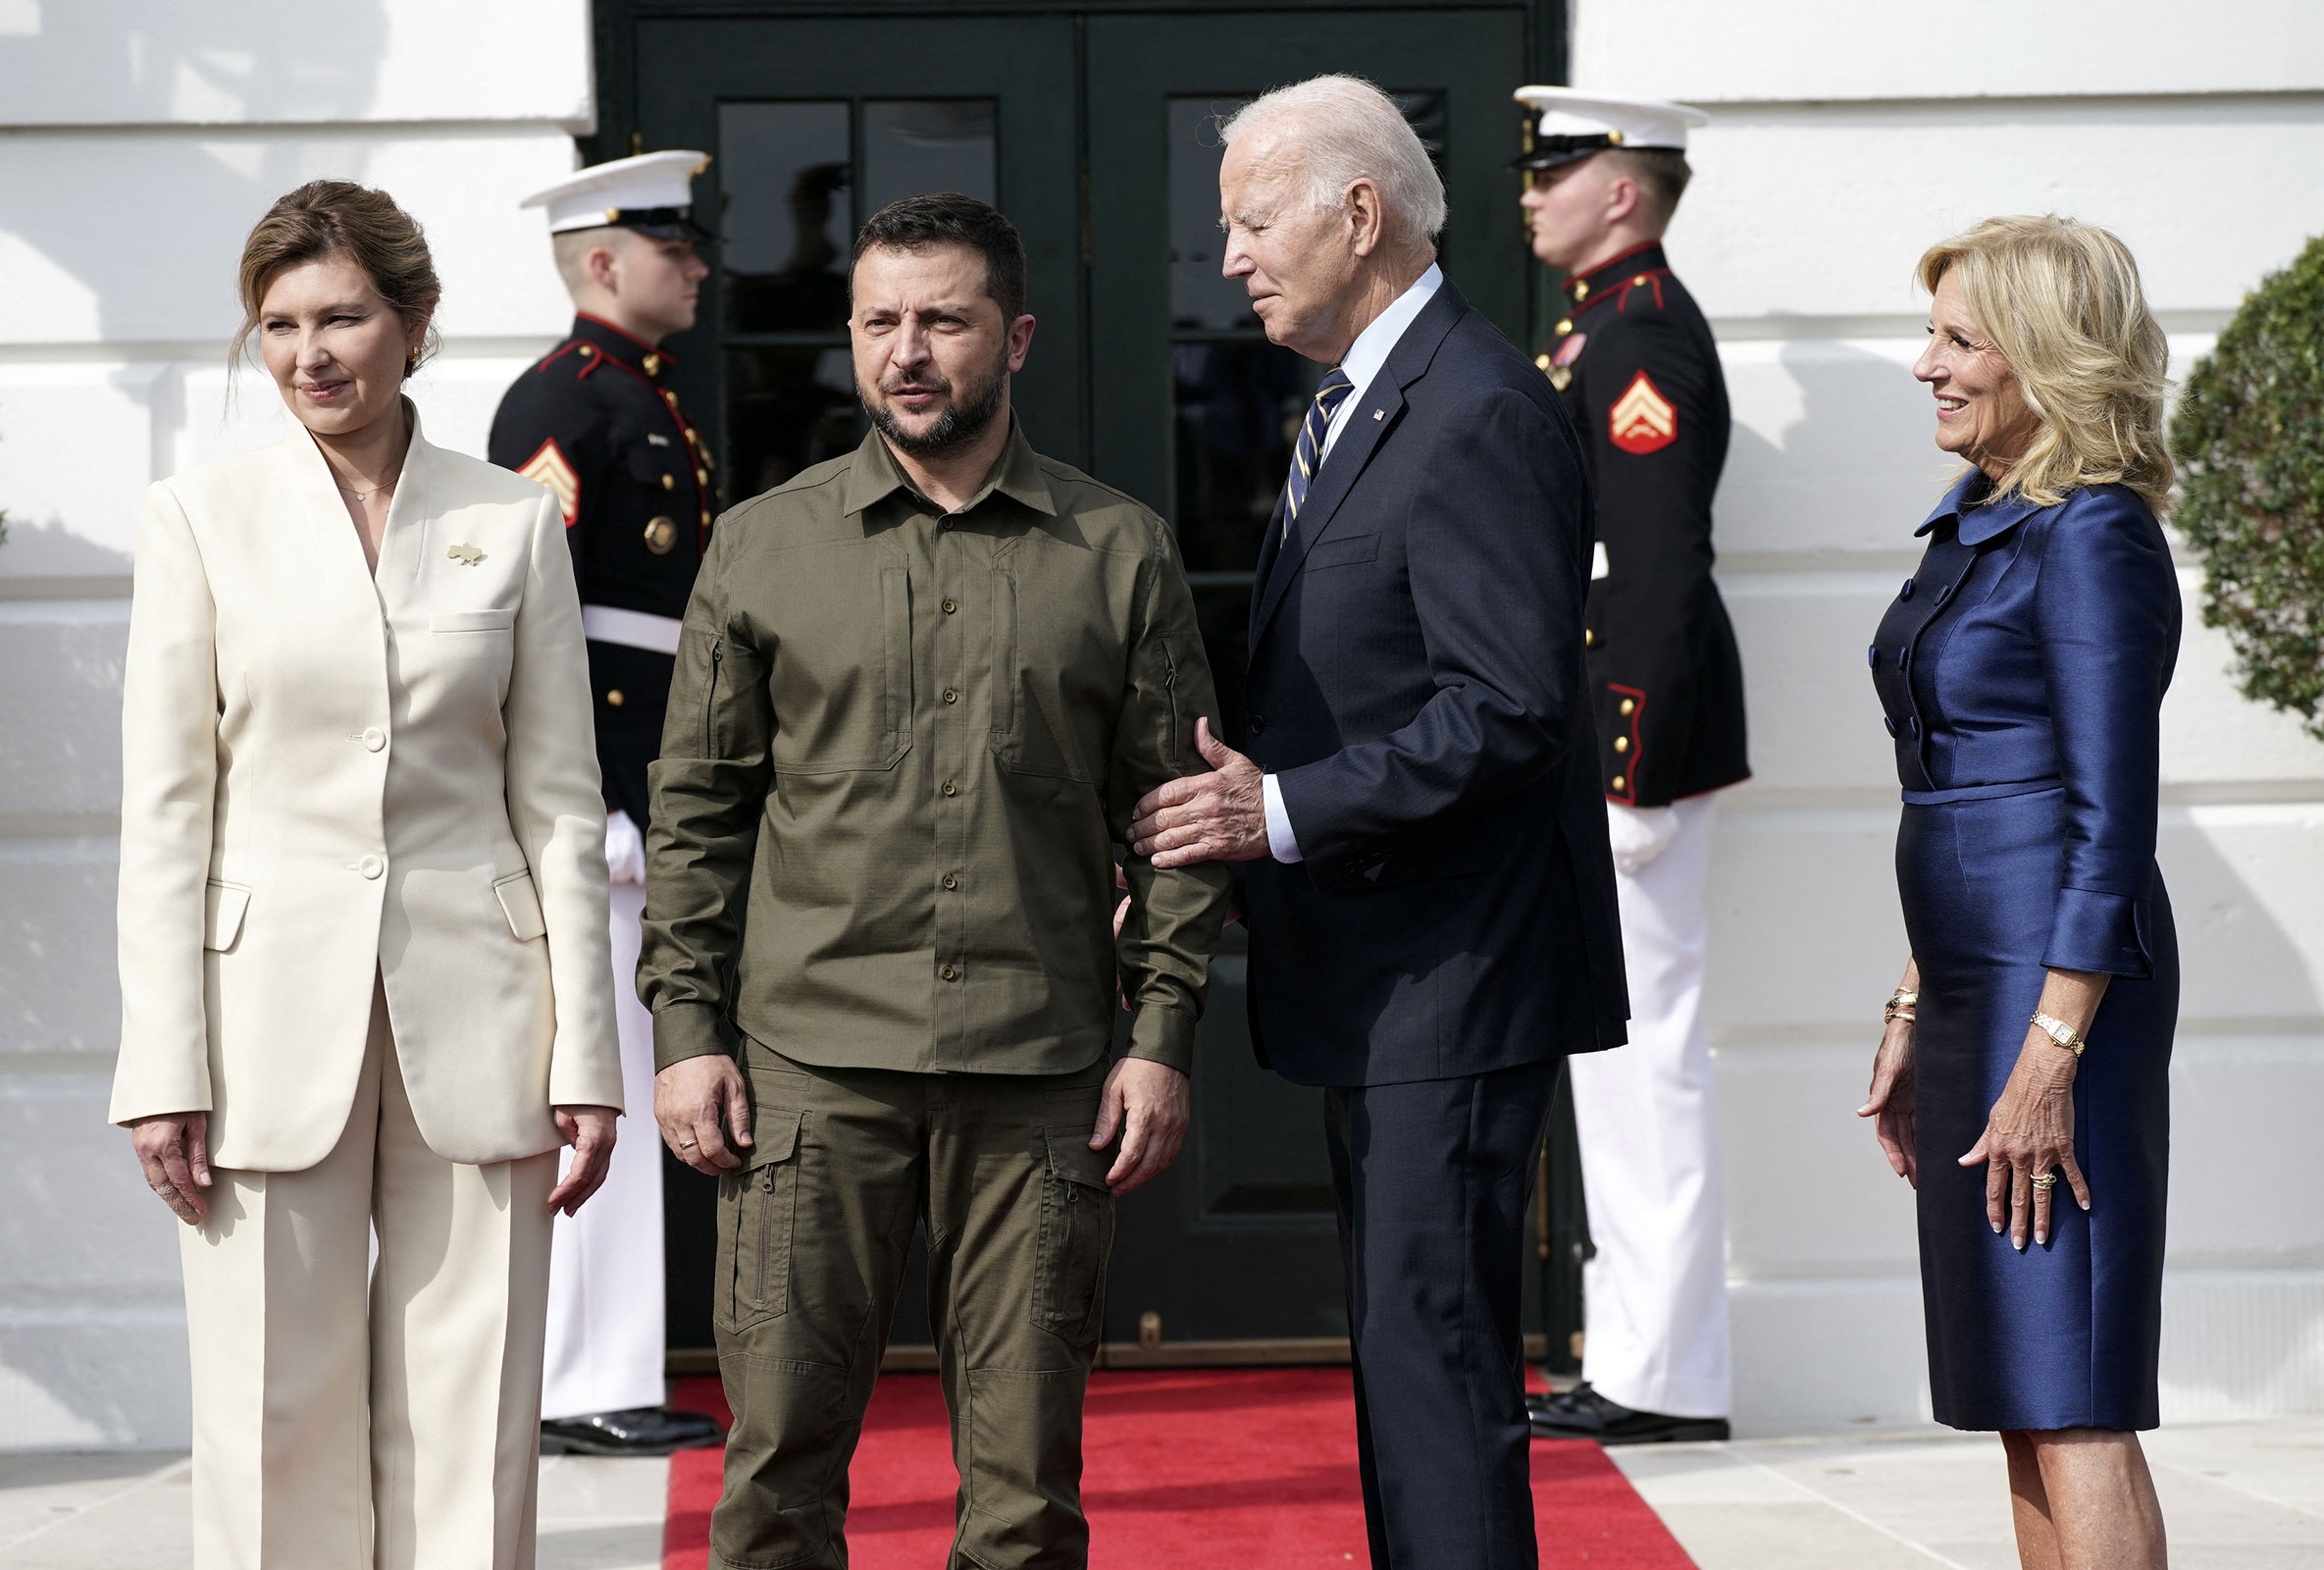 President Joe Biden and first lady Jill Biden welcome Ukrainian President Volodymyr Zelensky and his wife Olena as they arrive at the White House in Washington, DC, on Thursday. 